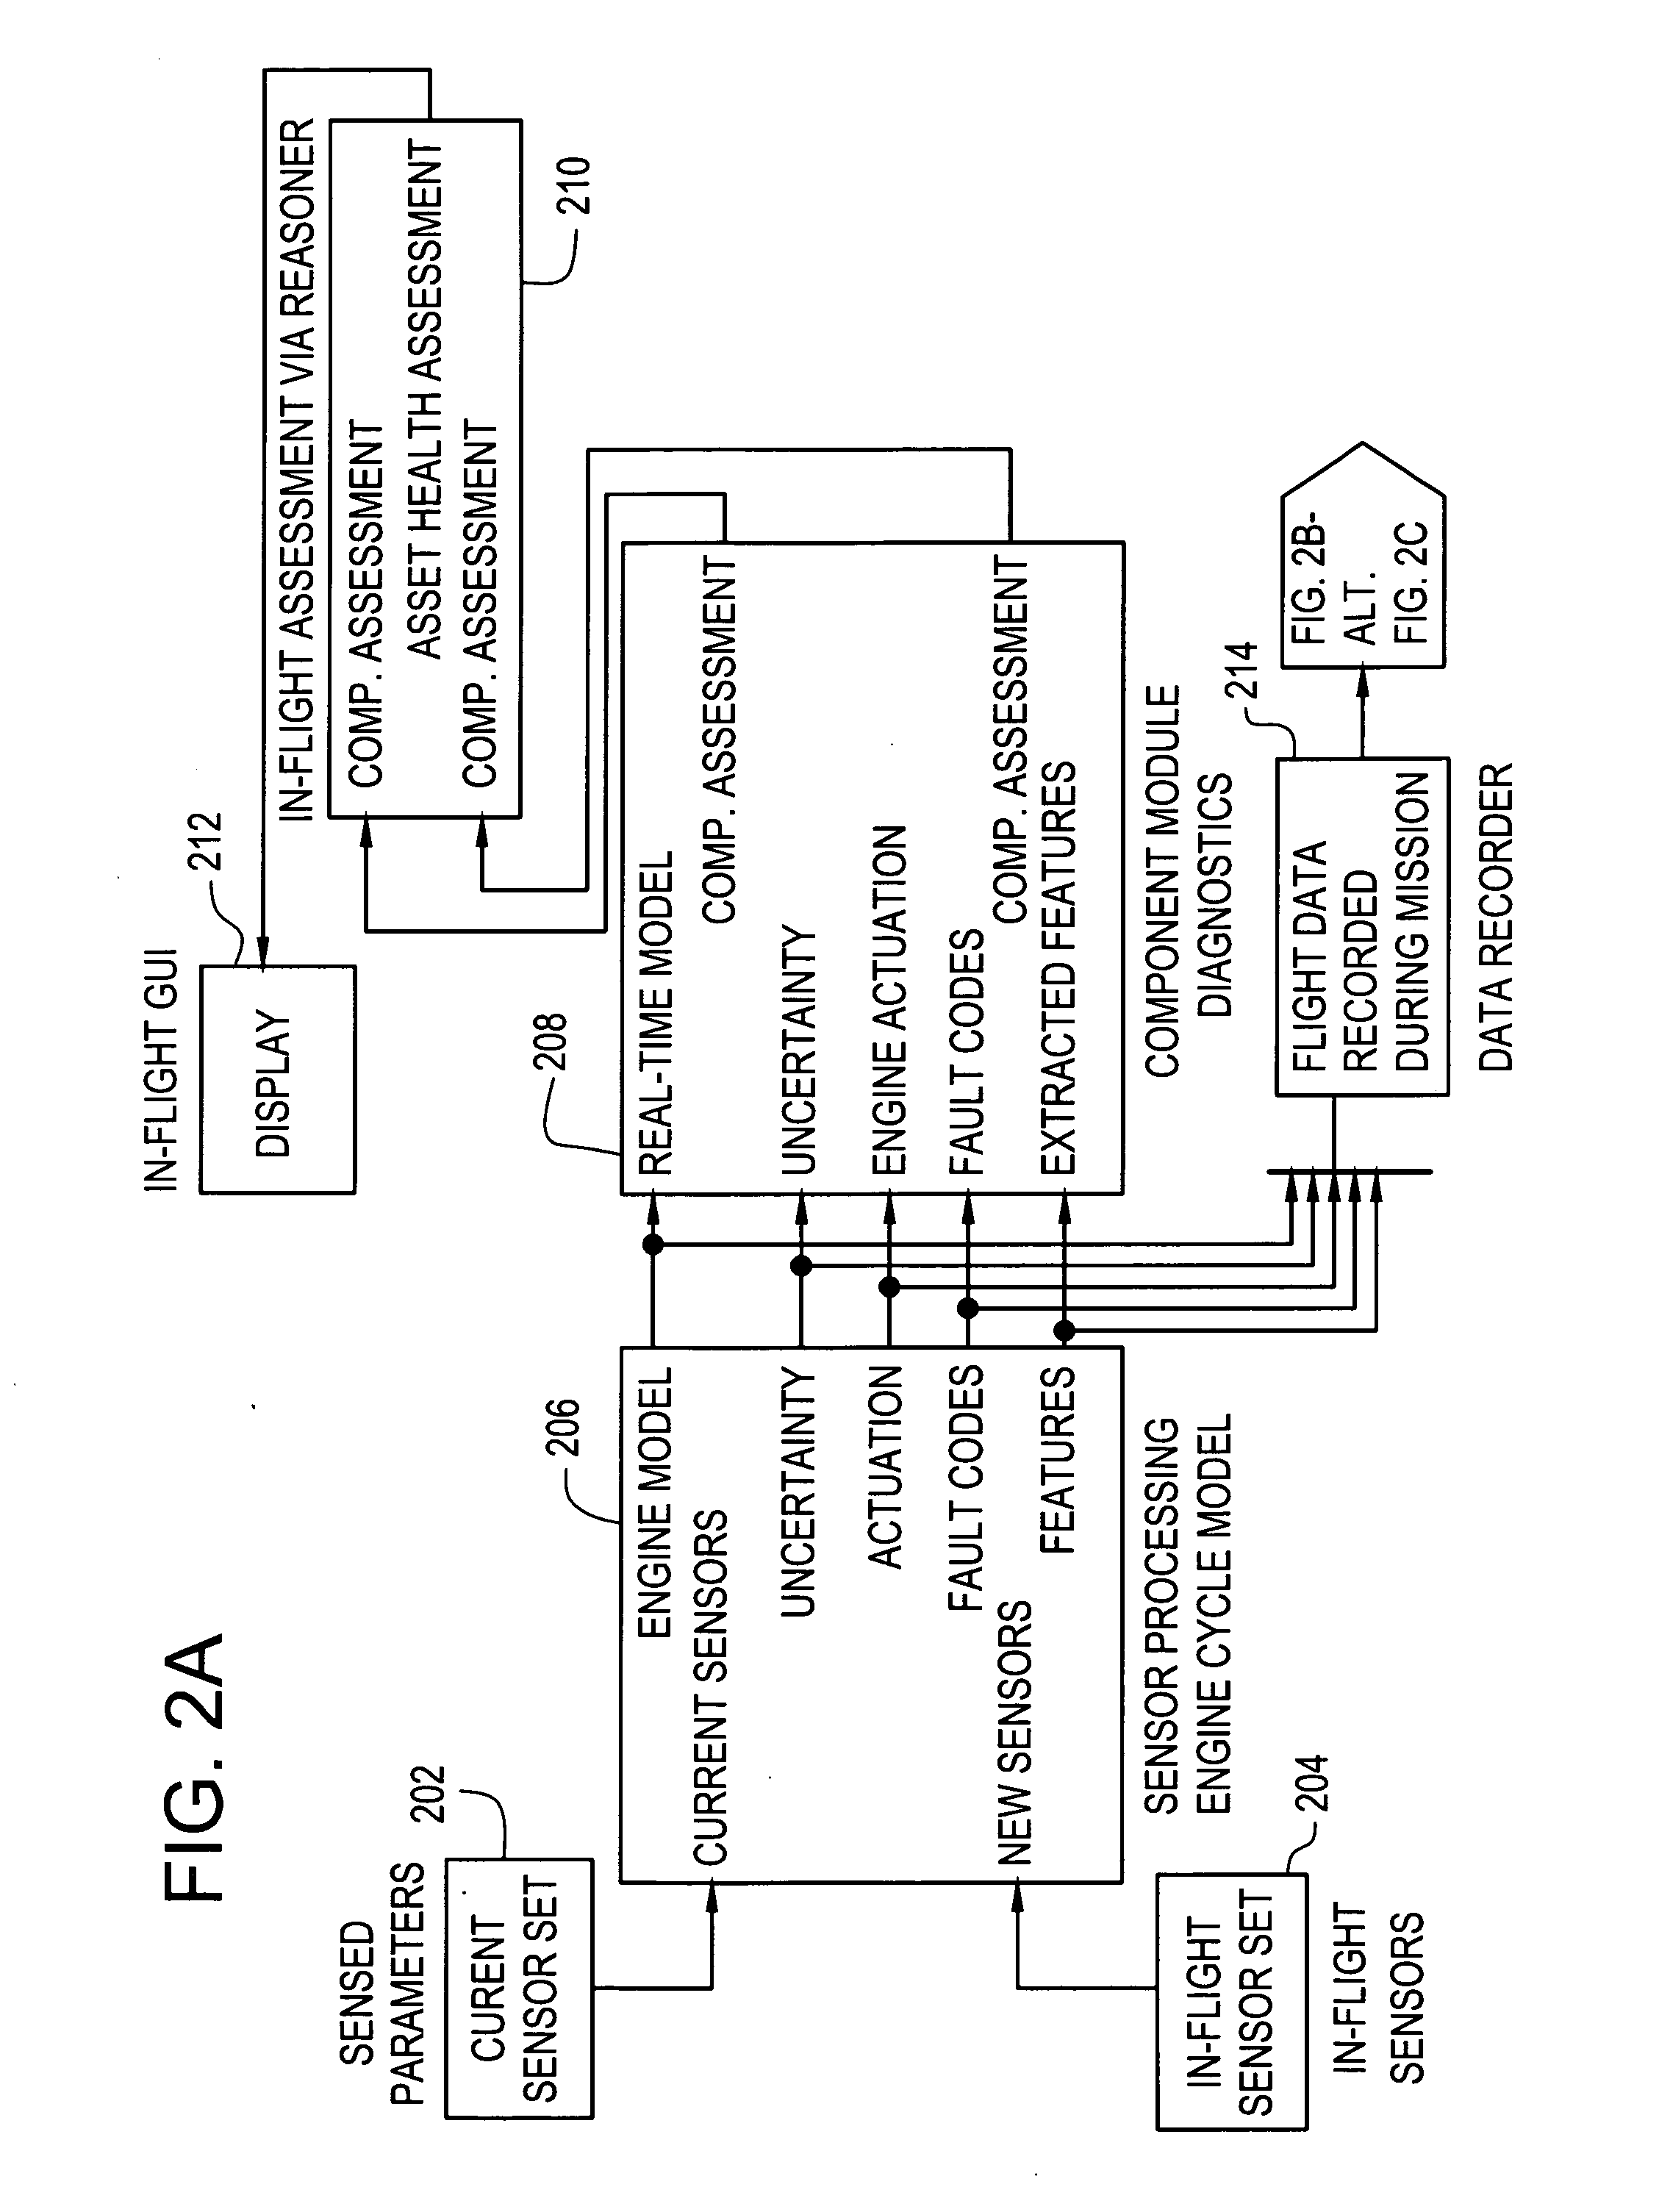 Method, system, and computer program product for performing prognosis and asset management services